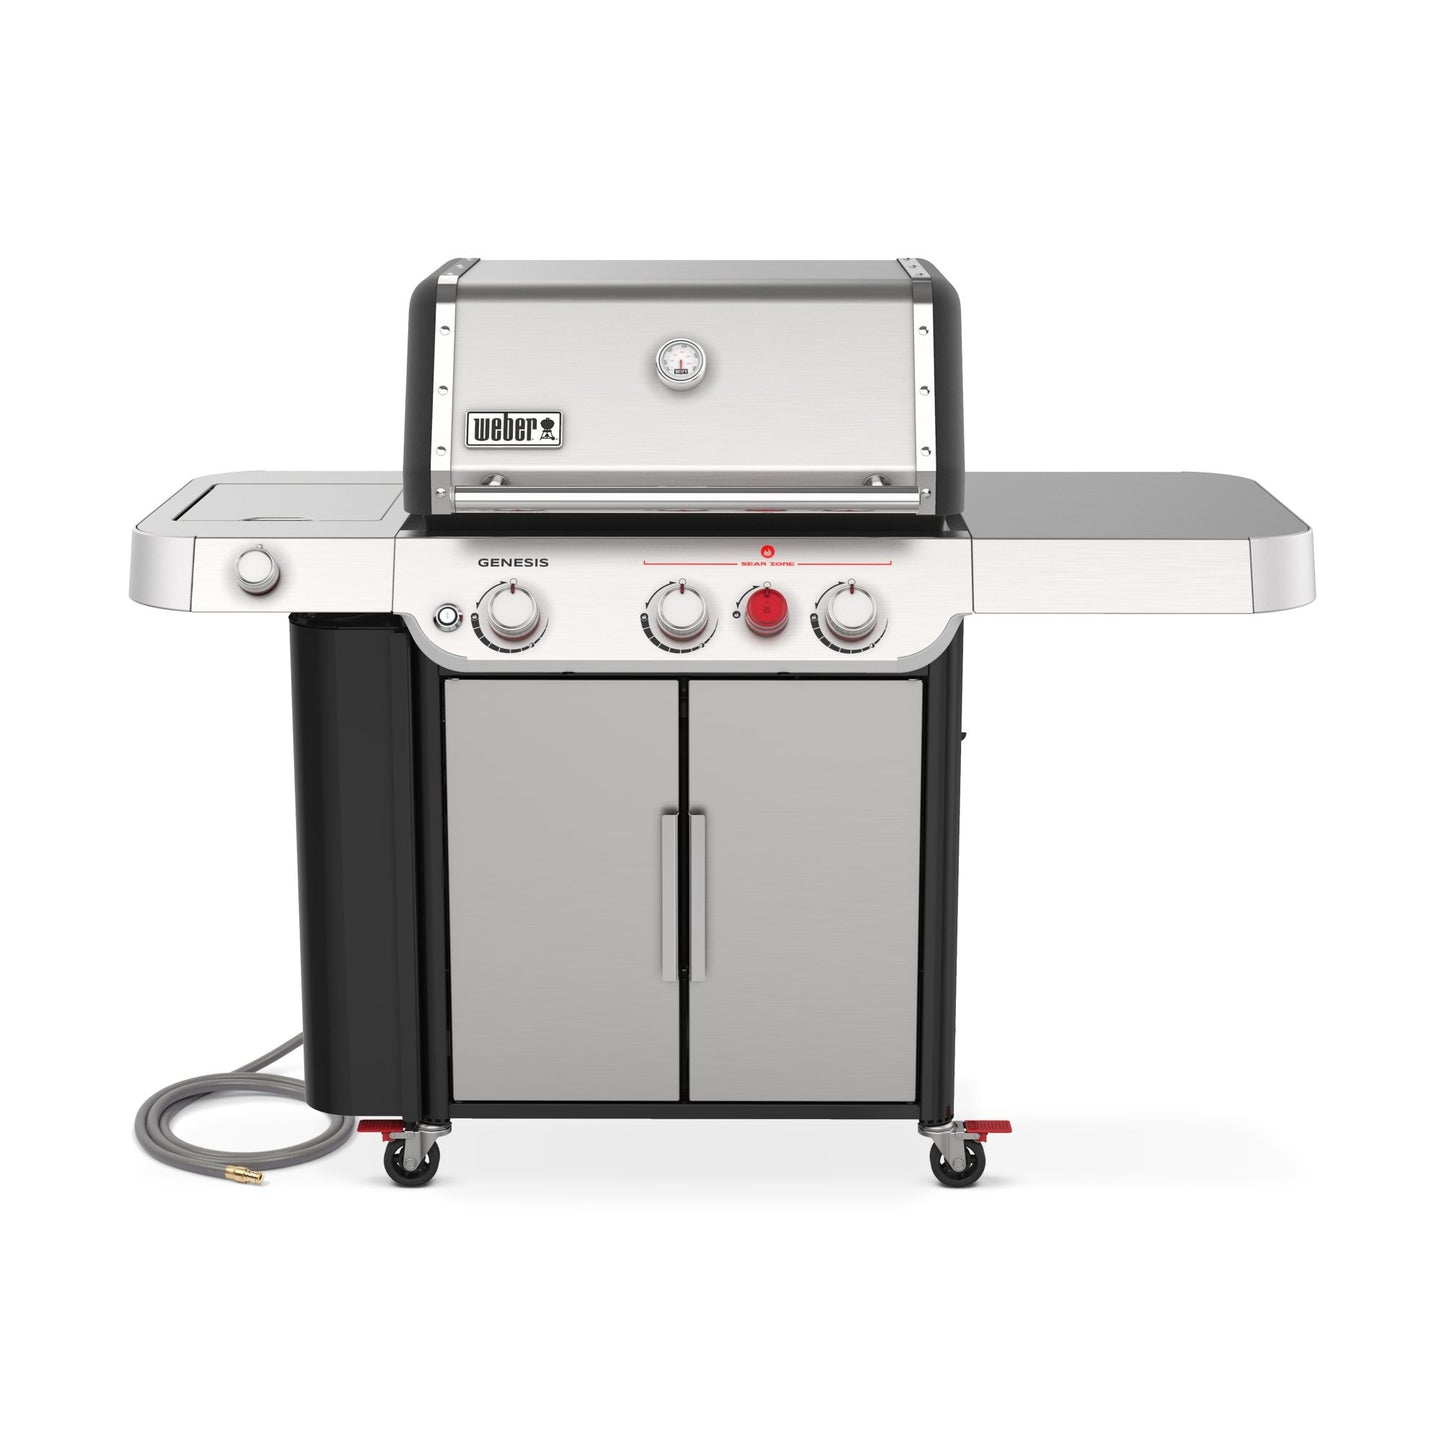 Weber Genesis SE-S-335s Gas Grill with Side Burner and Sear Zone